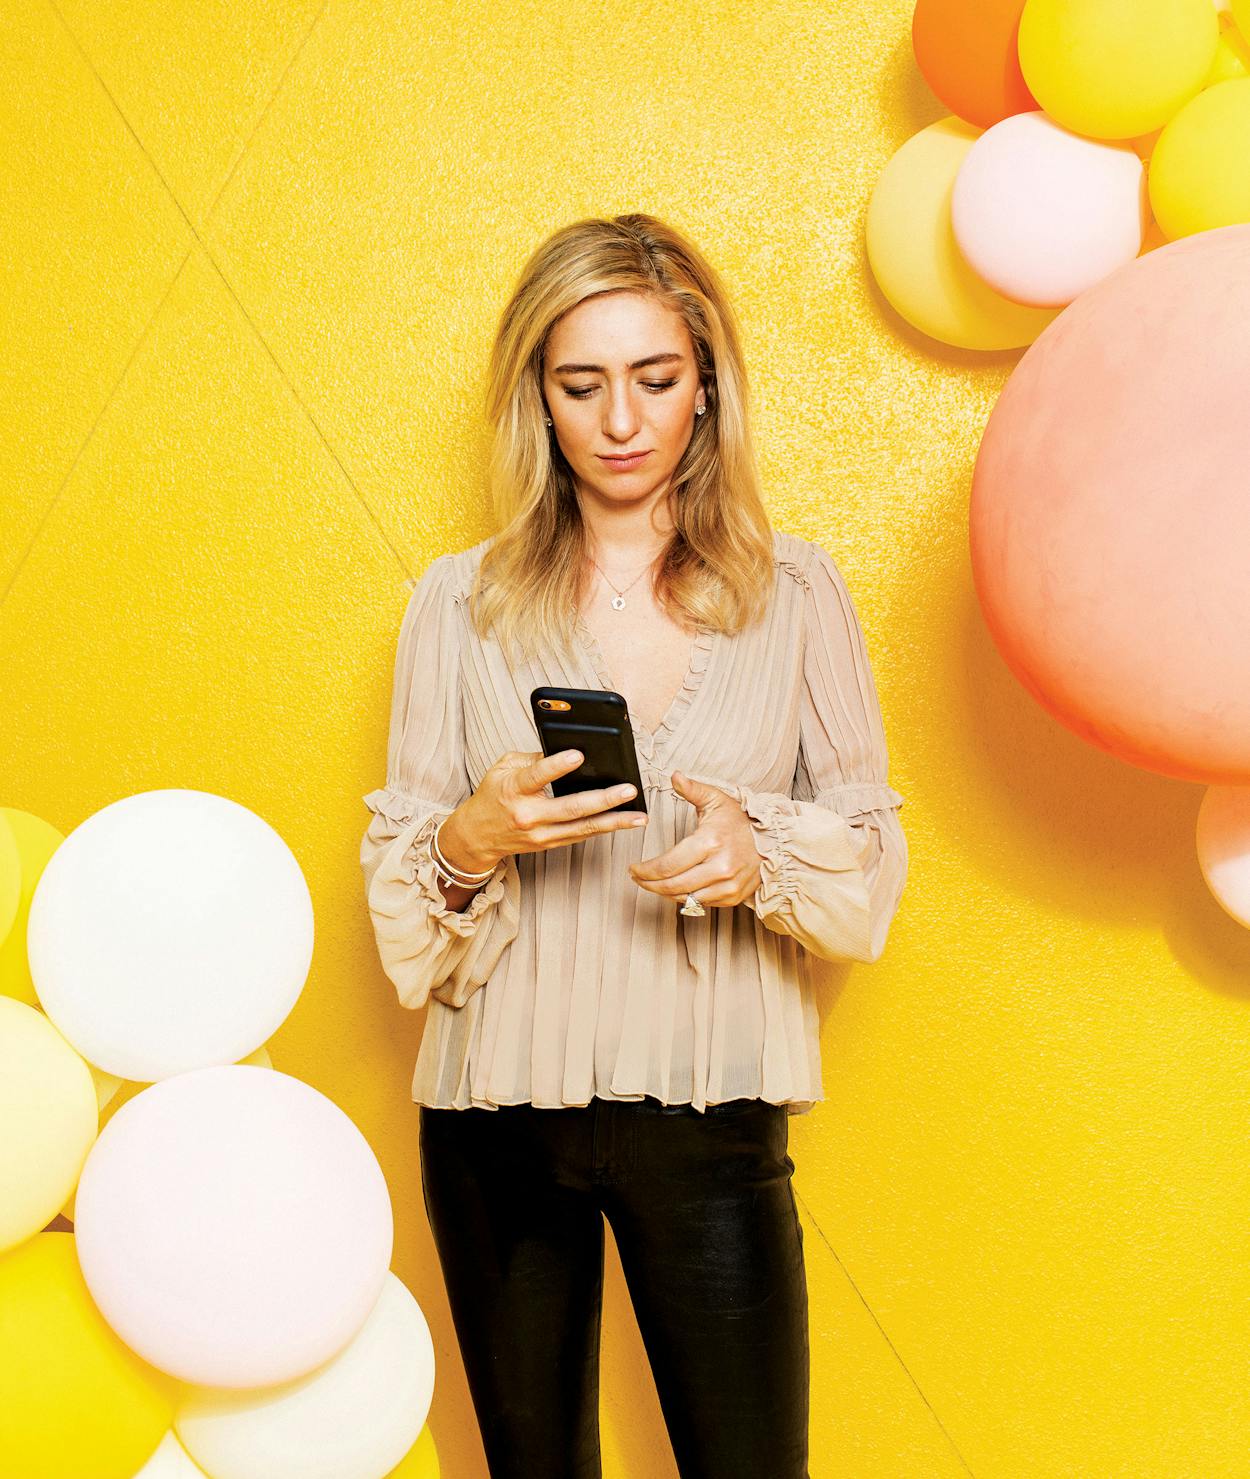 Hot Blonde Teen Riding Cock - How Whitney Wolfe Herd Changed the Dating Game â€“ Texas Monthly